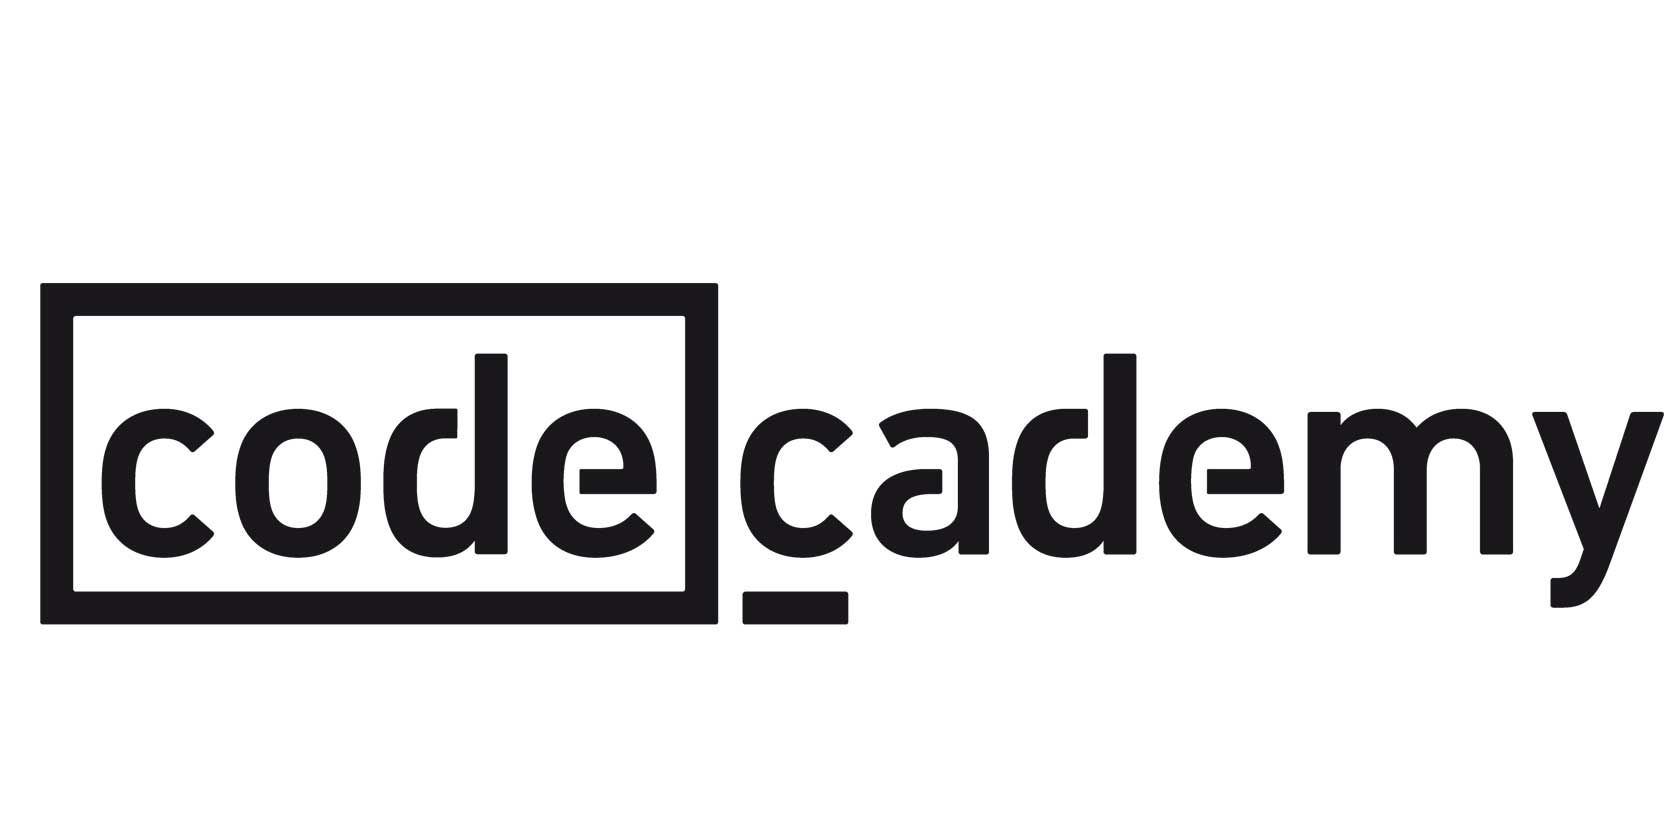 Learning To Code Becomes More Fun As Codecademy Reveals New Design